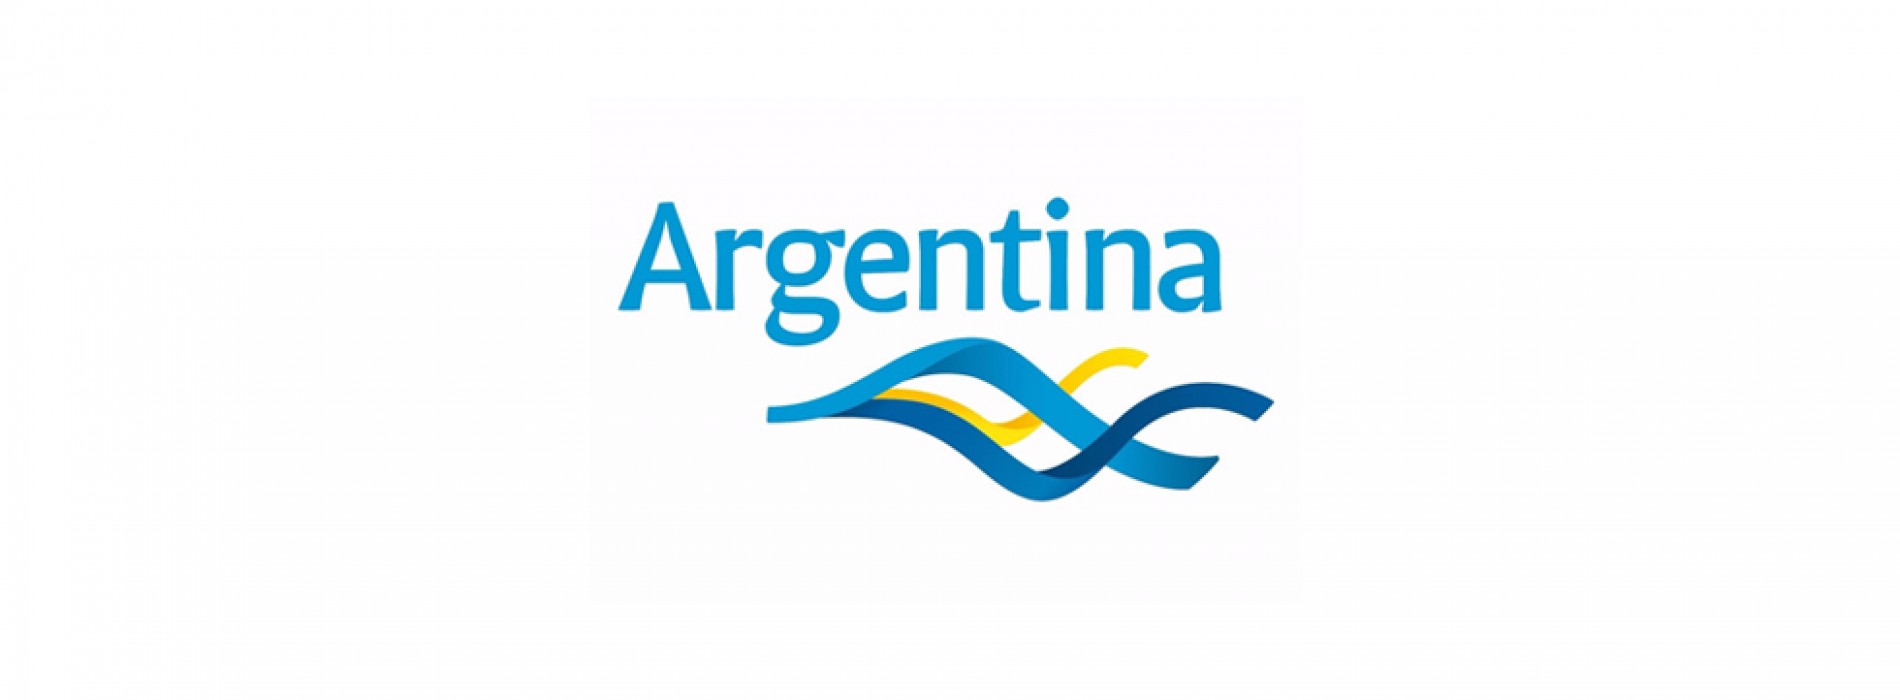 Argentina made an outstanding trade mission in Asia